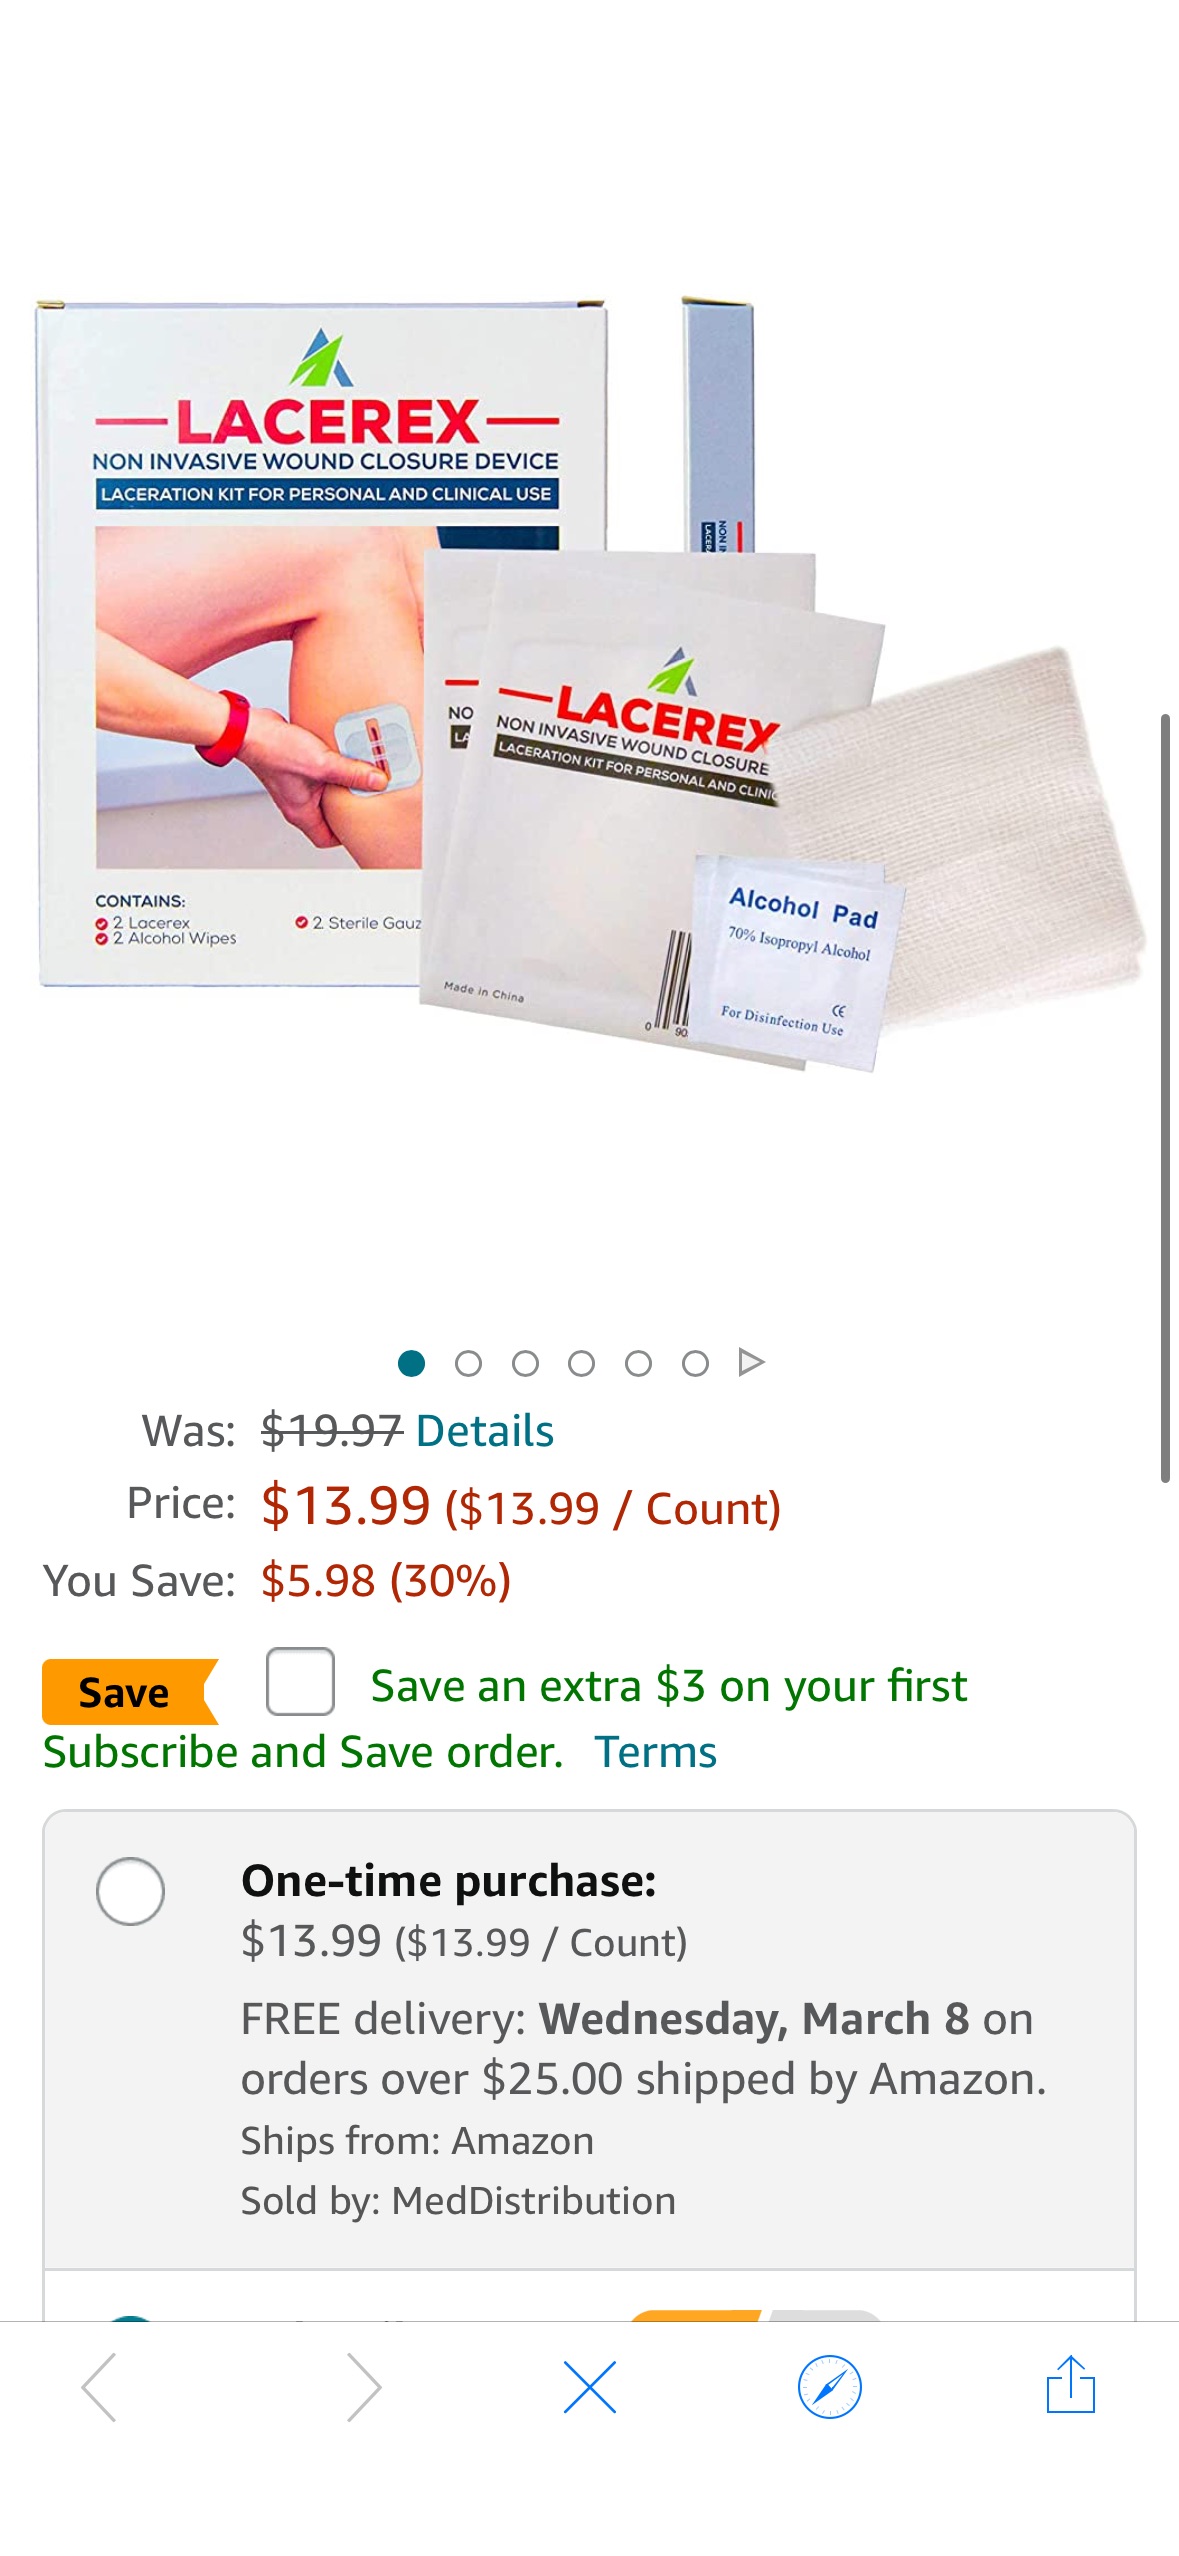 Amazon.com: AWD Zip Stitch Surgical Wound Closure Strips - 2 Zipstitch Devices, 2 Sterile Gauzes, 2 Alcohol Wipes - Emergency Laceration Device for Cuts Without Stitches - Steri Strips